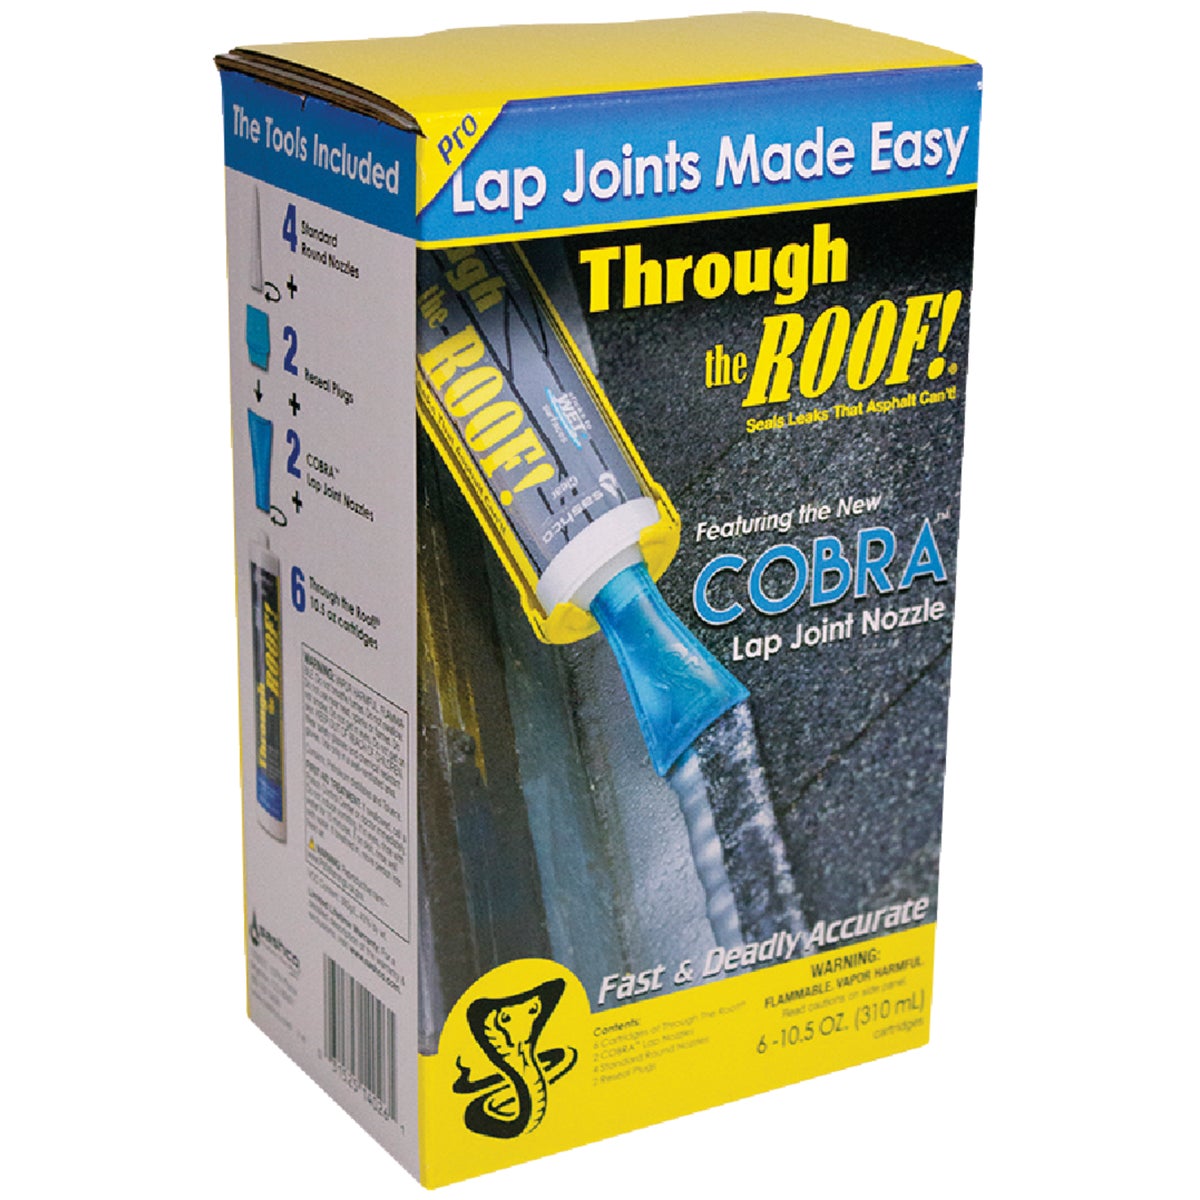 14026 Cobra Lap Joint Nozzle System With Through The Roof! Sealant & cement patching roof sealant